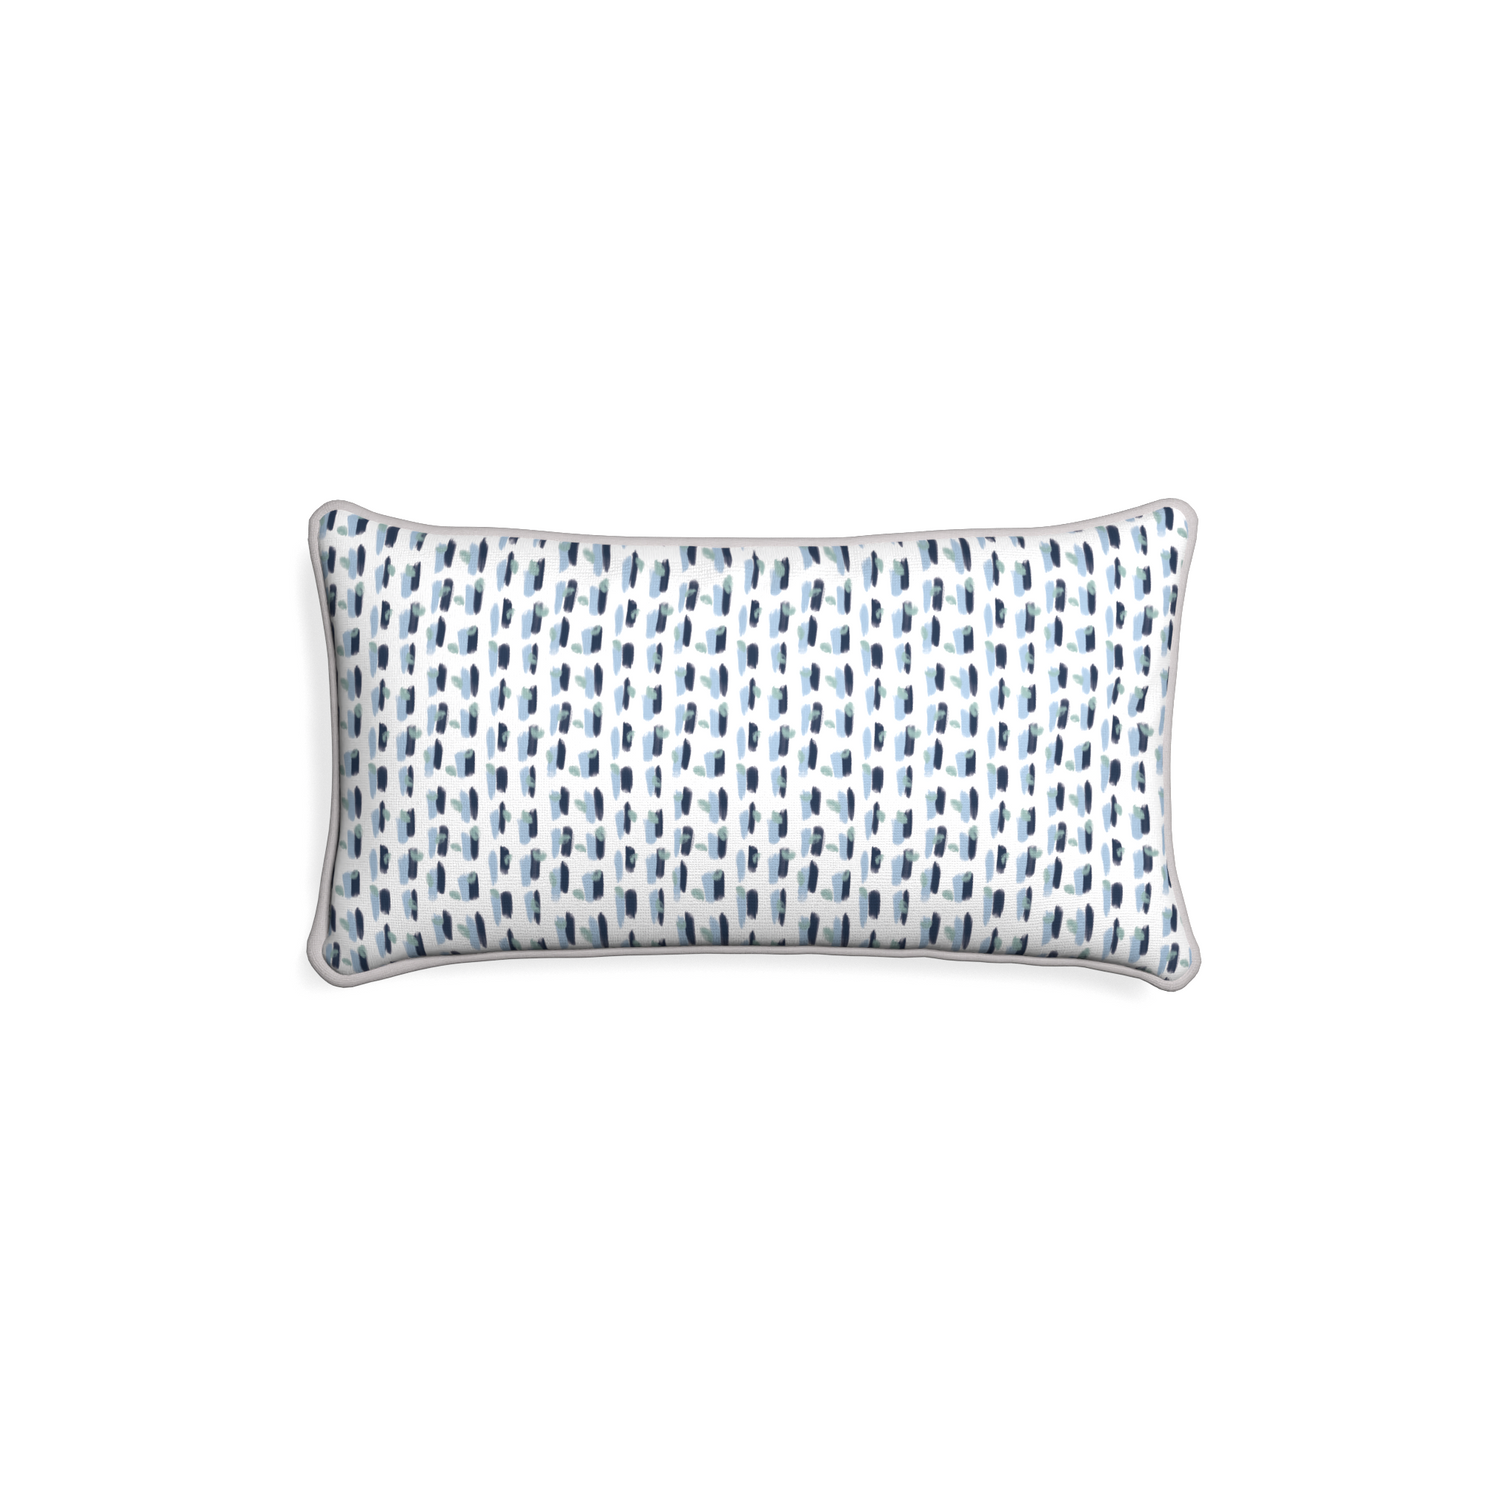 Petite-lumbar poppy custom blue and whitepillow with pebble piping on white background